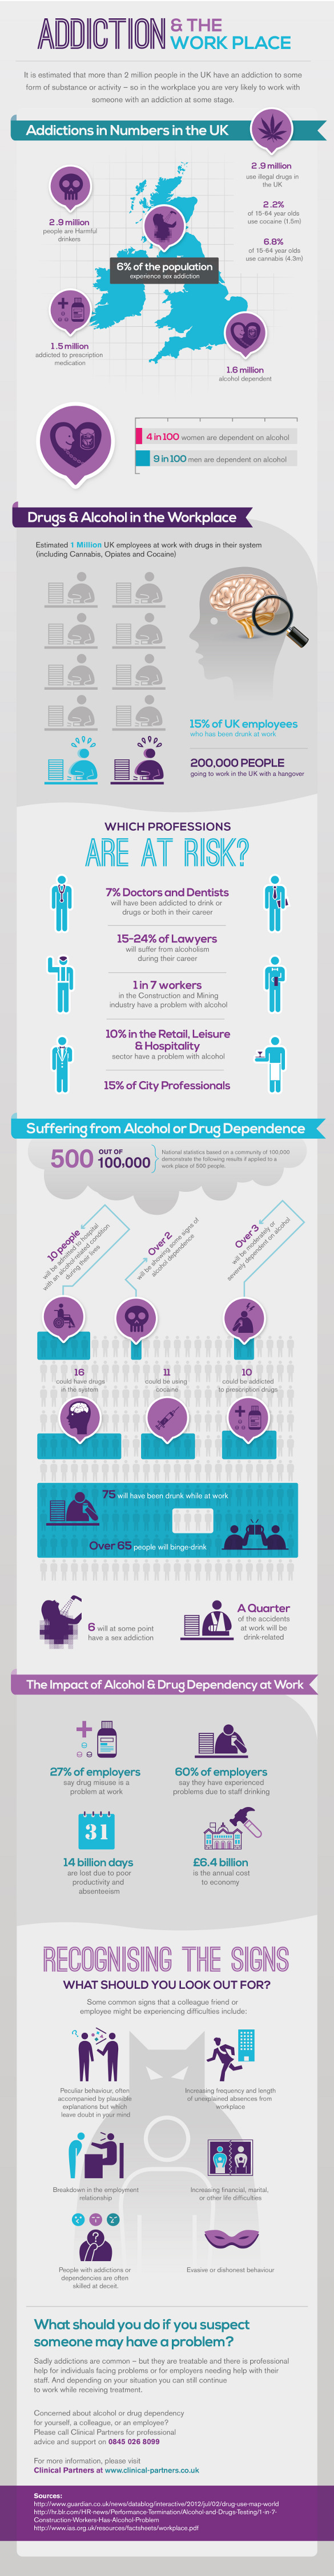 Statistics of Drug and Alcohol Addictions at Work Place